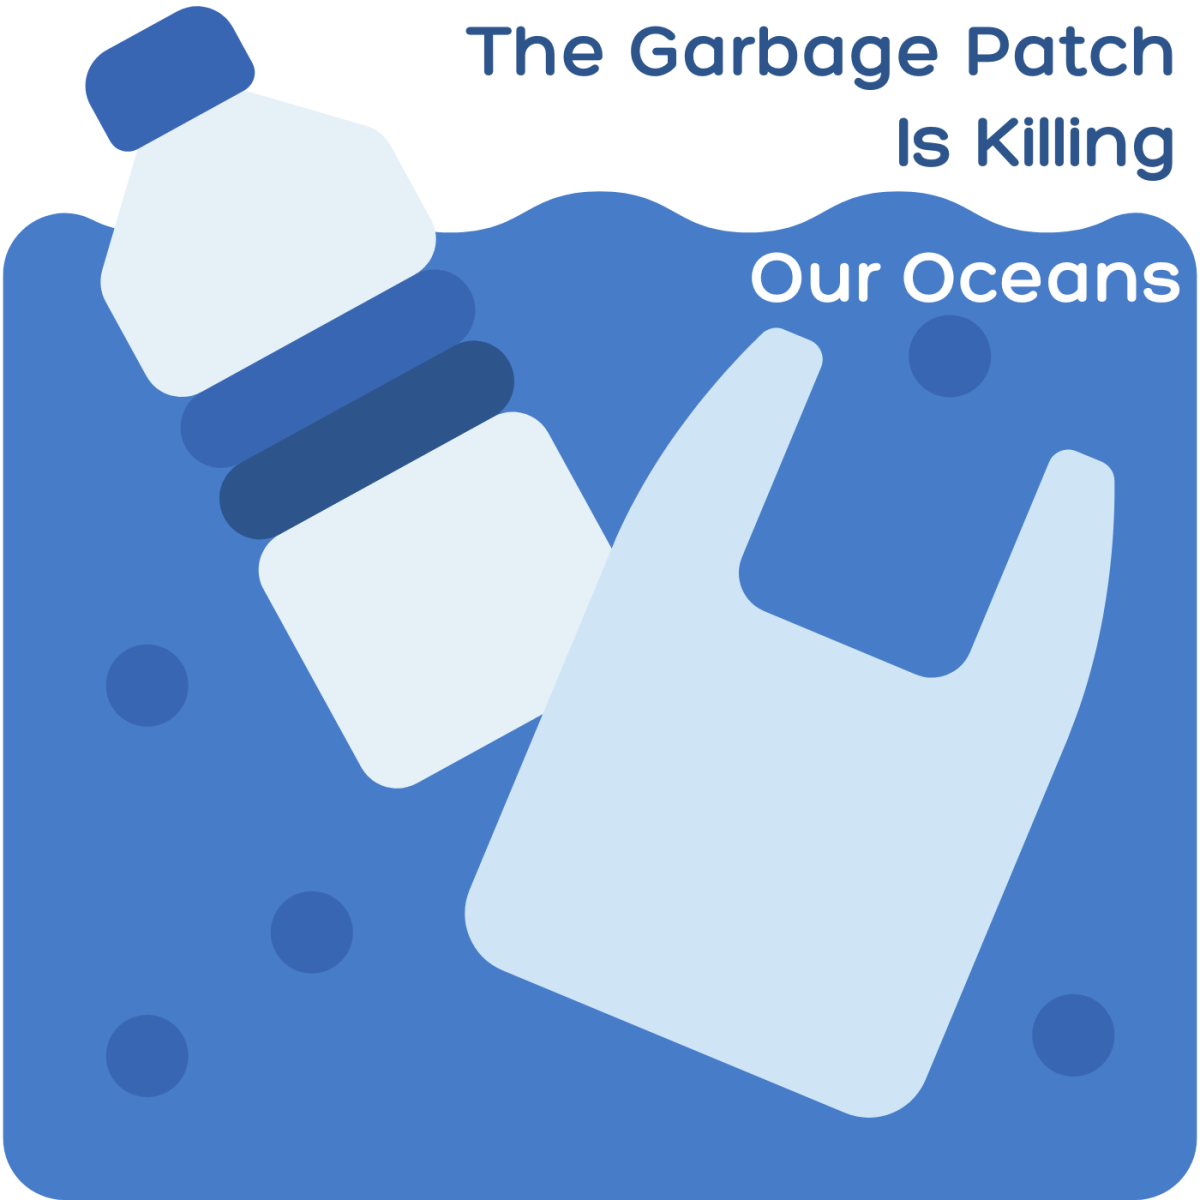 The Great Pacific Garbage Patch: A Blight On Our Planet